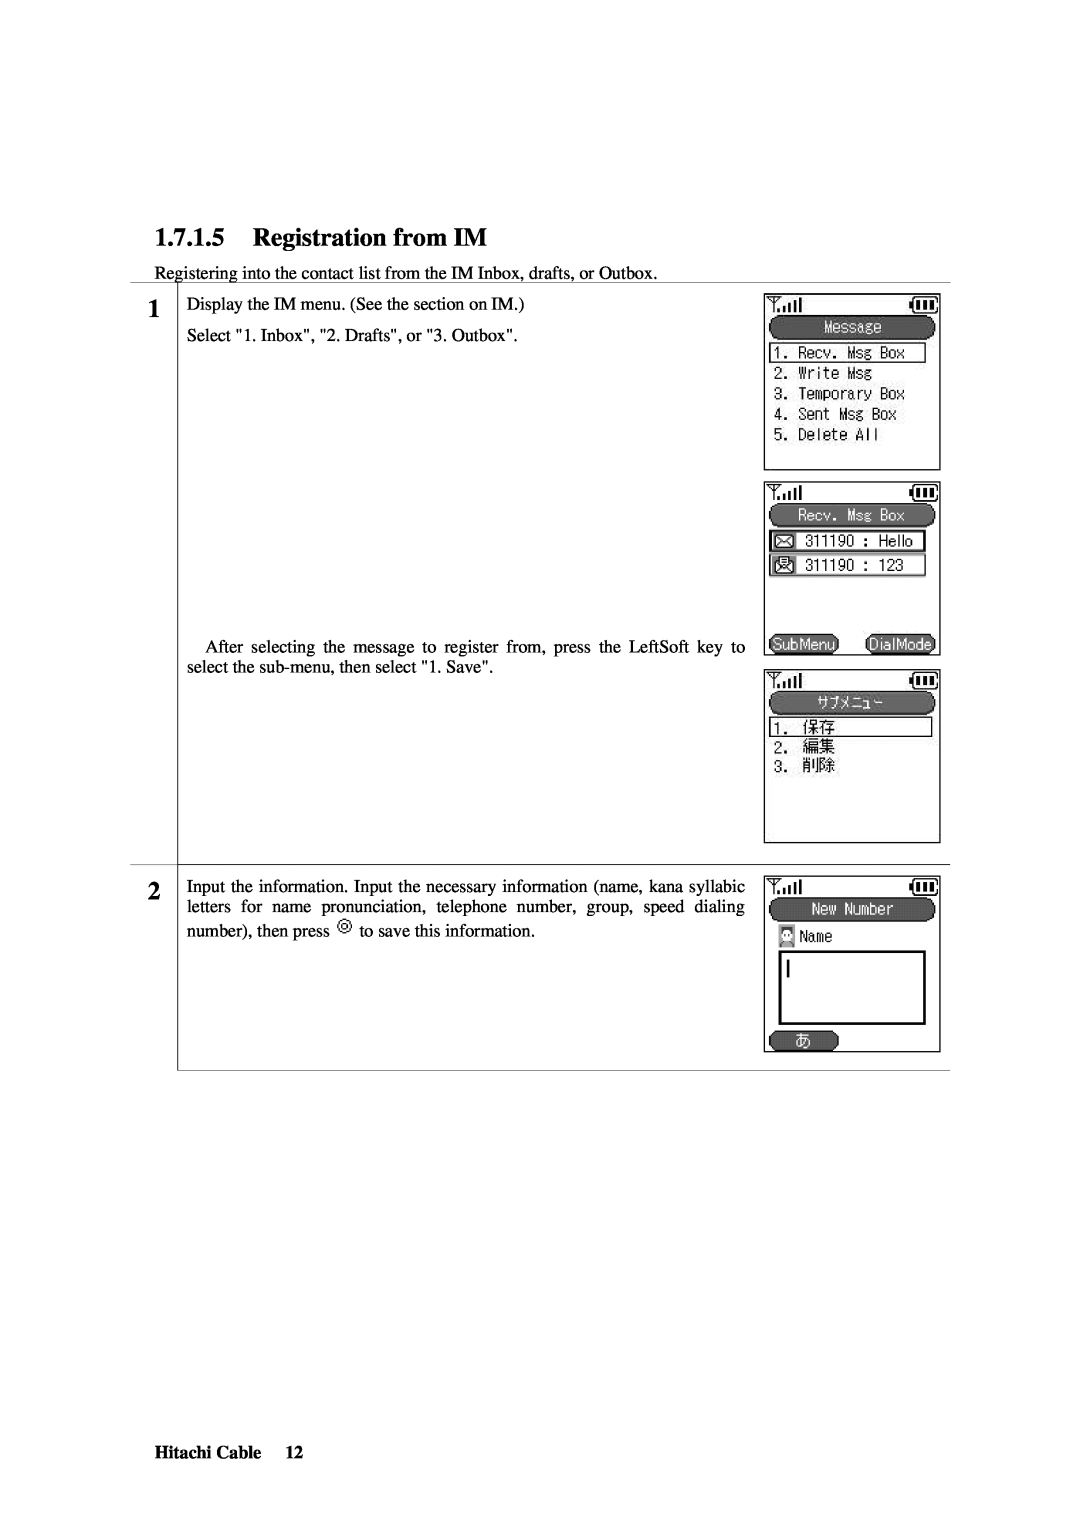 Hitachi TD61-2472 user manual Registration from IM, Hitachi Cable 